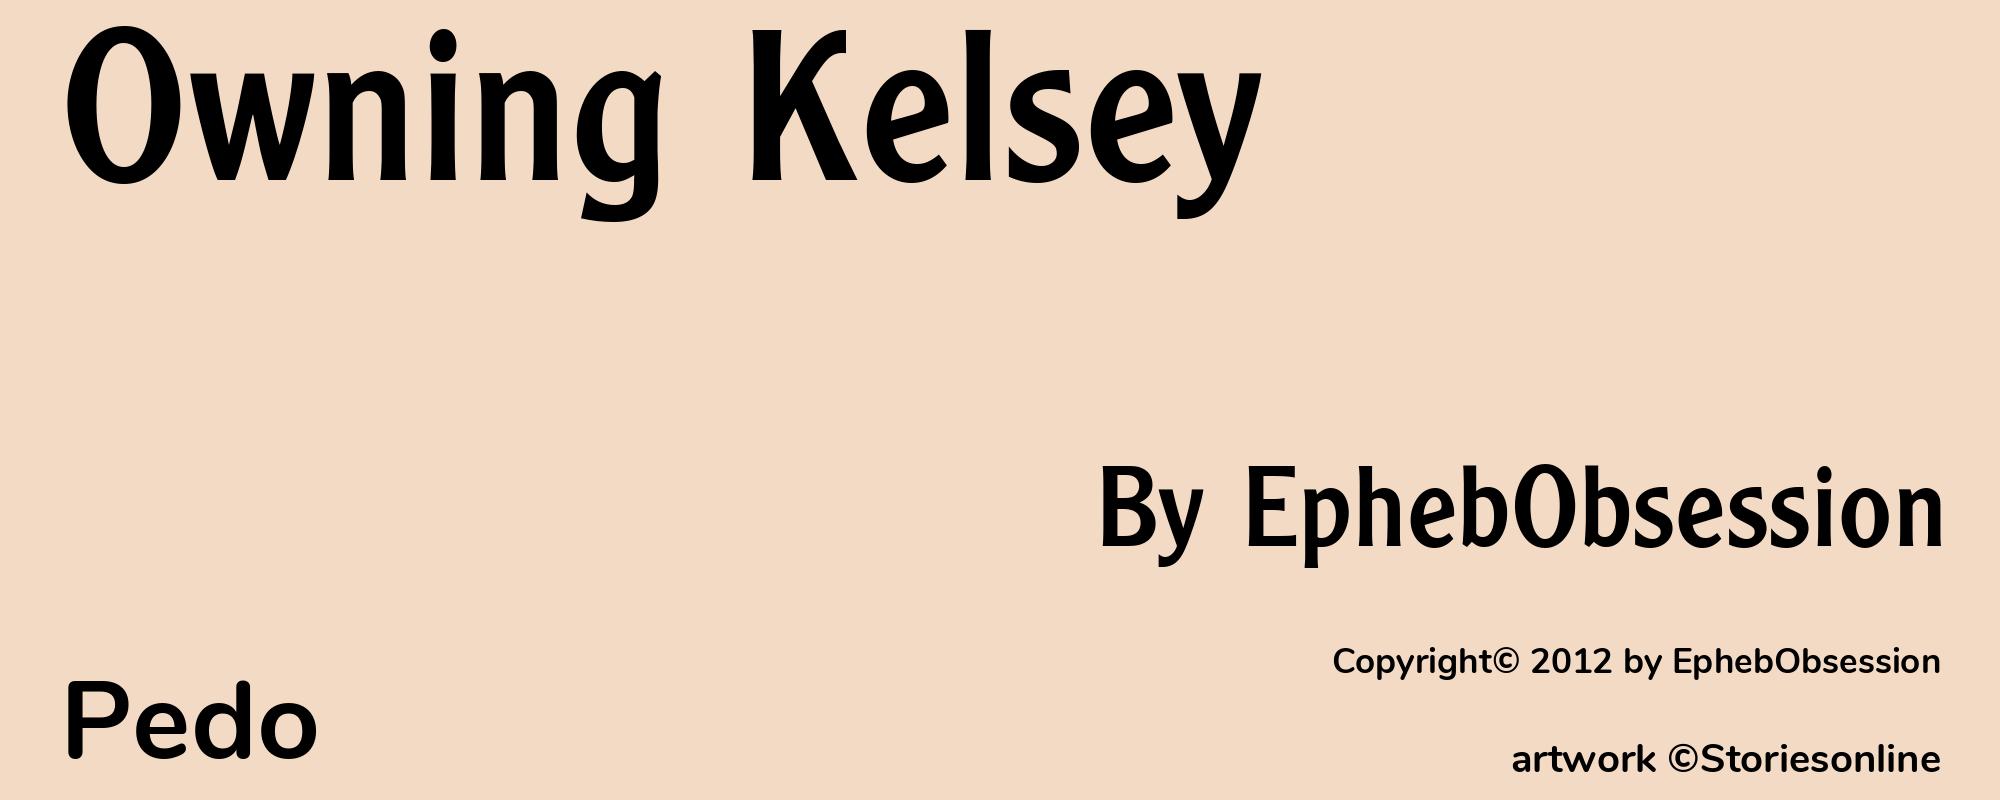 Owning Kelsey - Cover